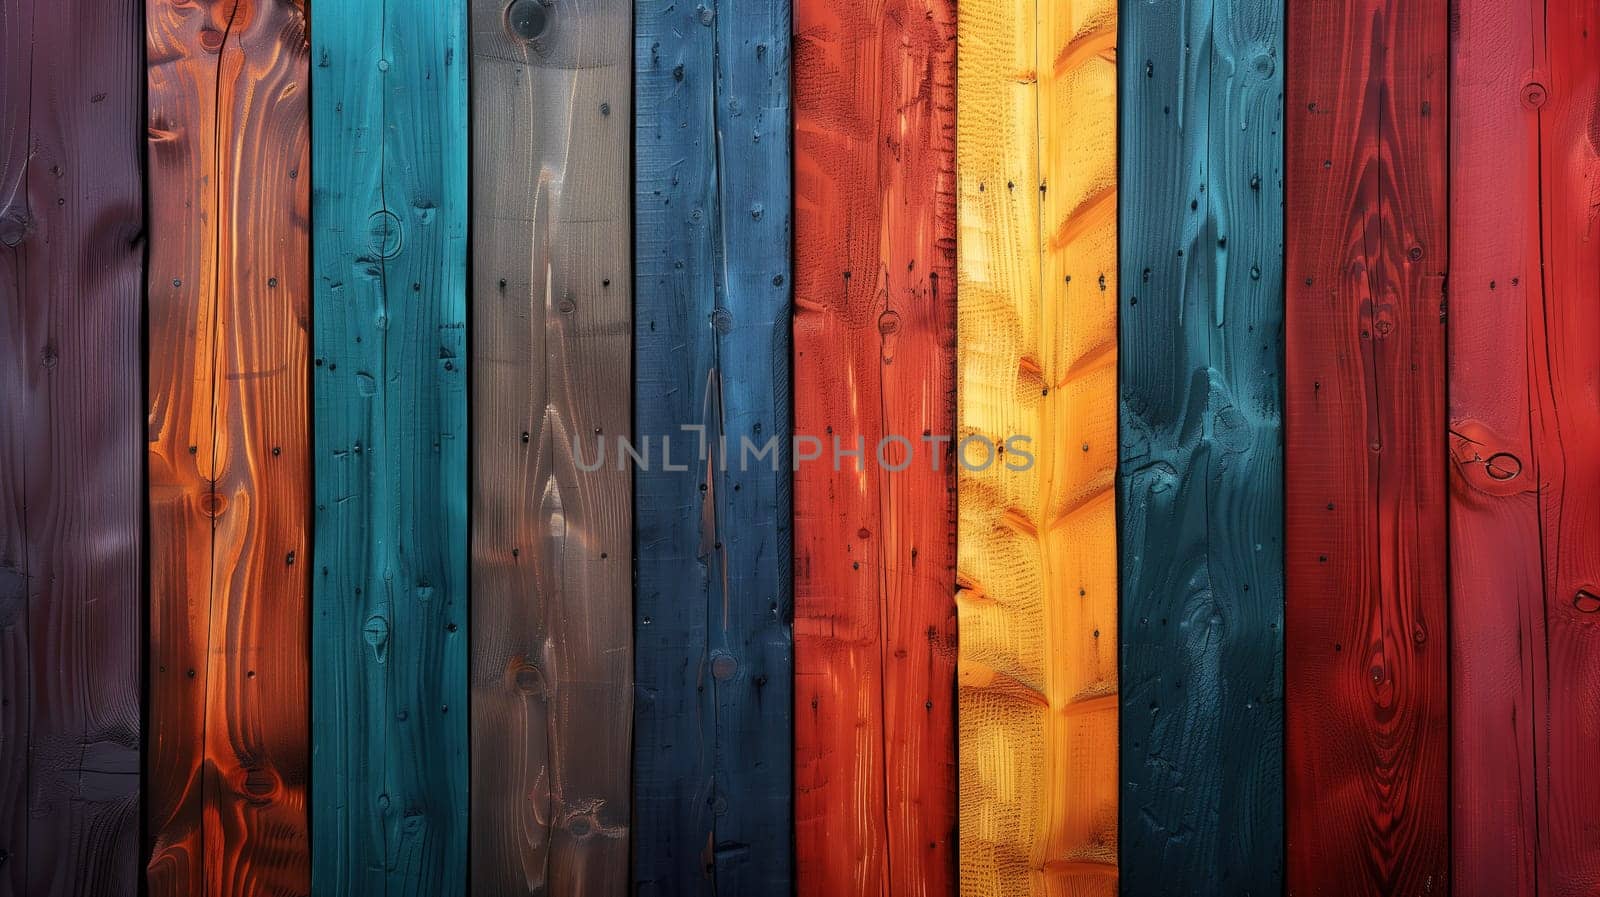 Rainbow Colored Wooden Fence With LGBT Pride Colors by TRMK